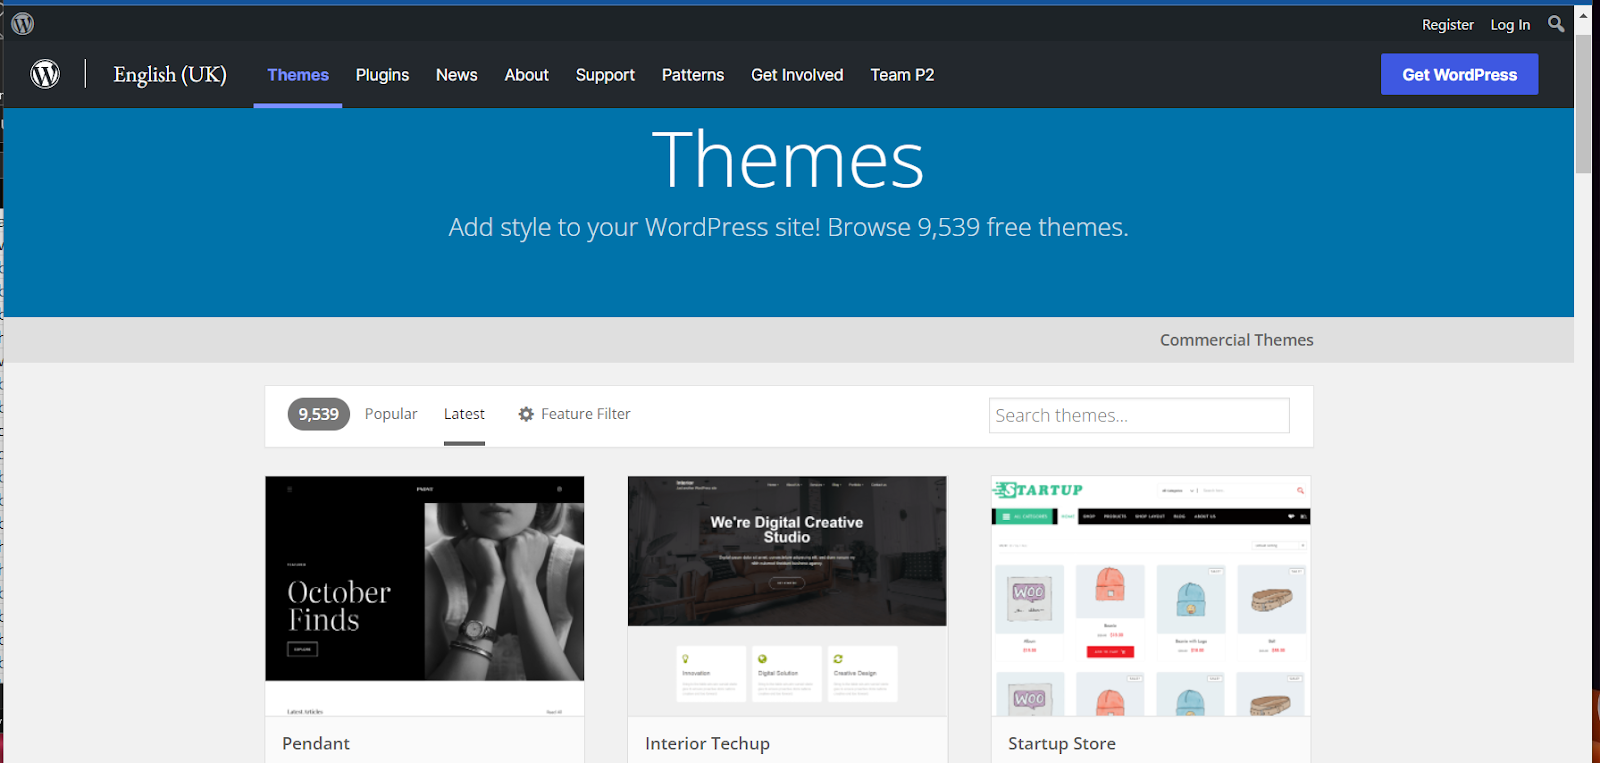 There are over 9.500 free WordPress themes in the repository